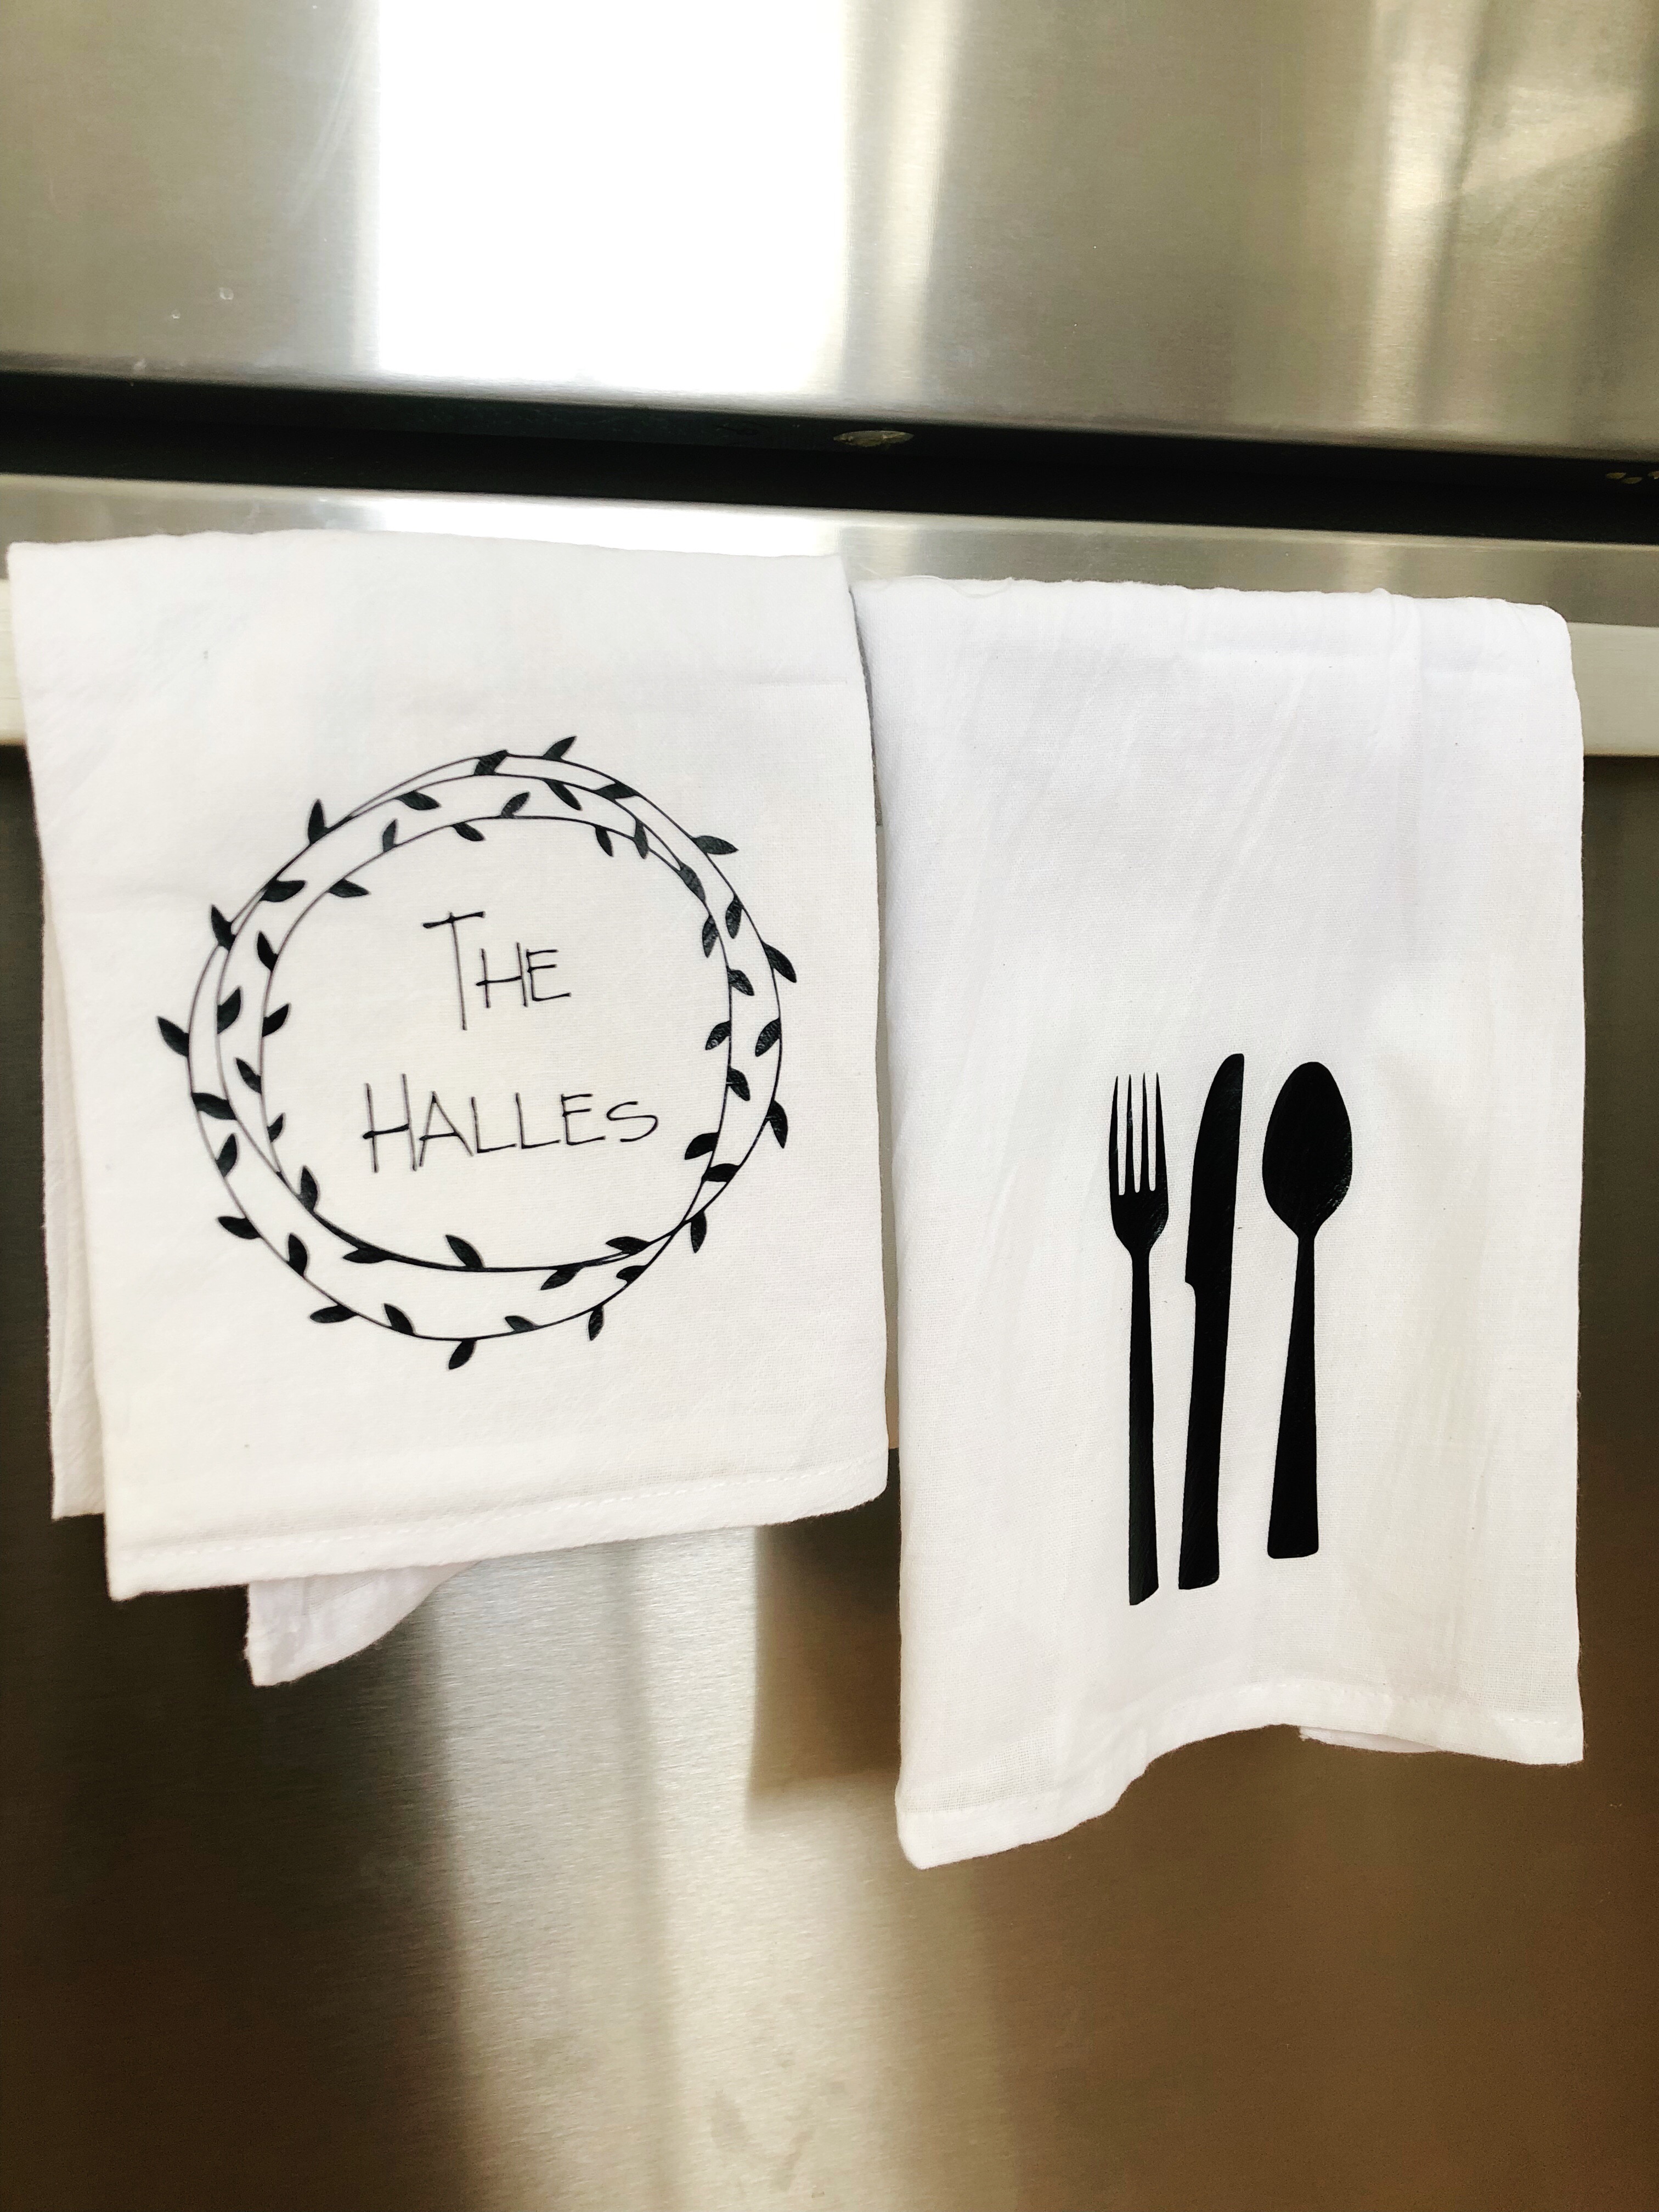 Details about   Embroidered Tea Towels OR Flour Sack Tea Towels with heat transfer vinyl 